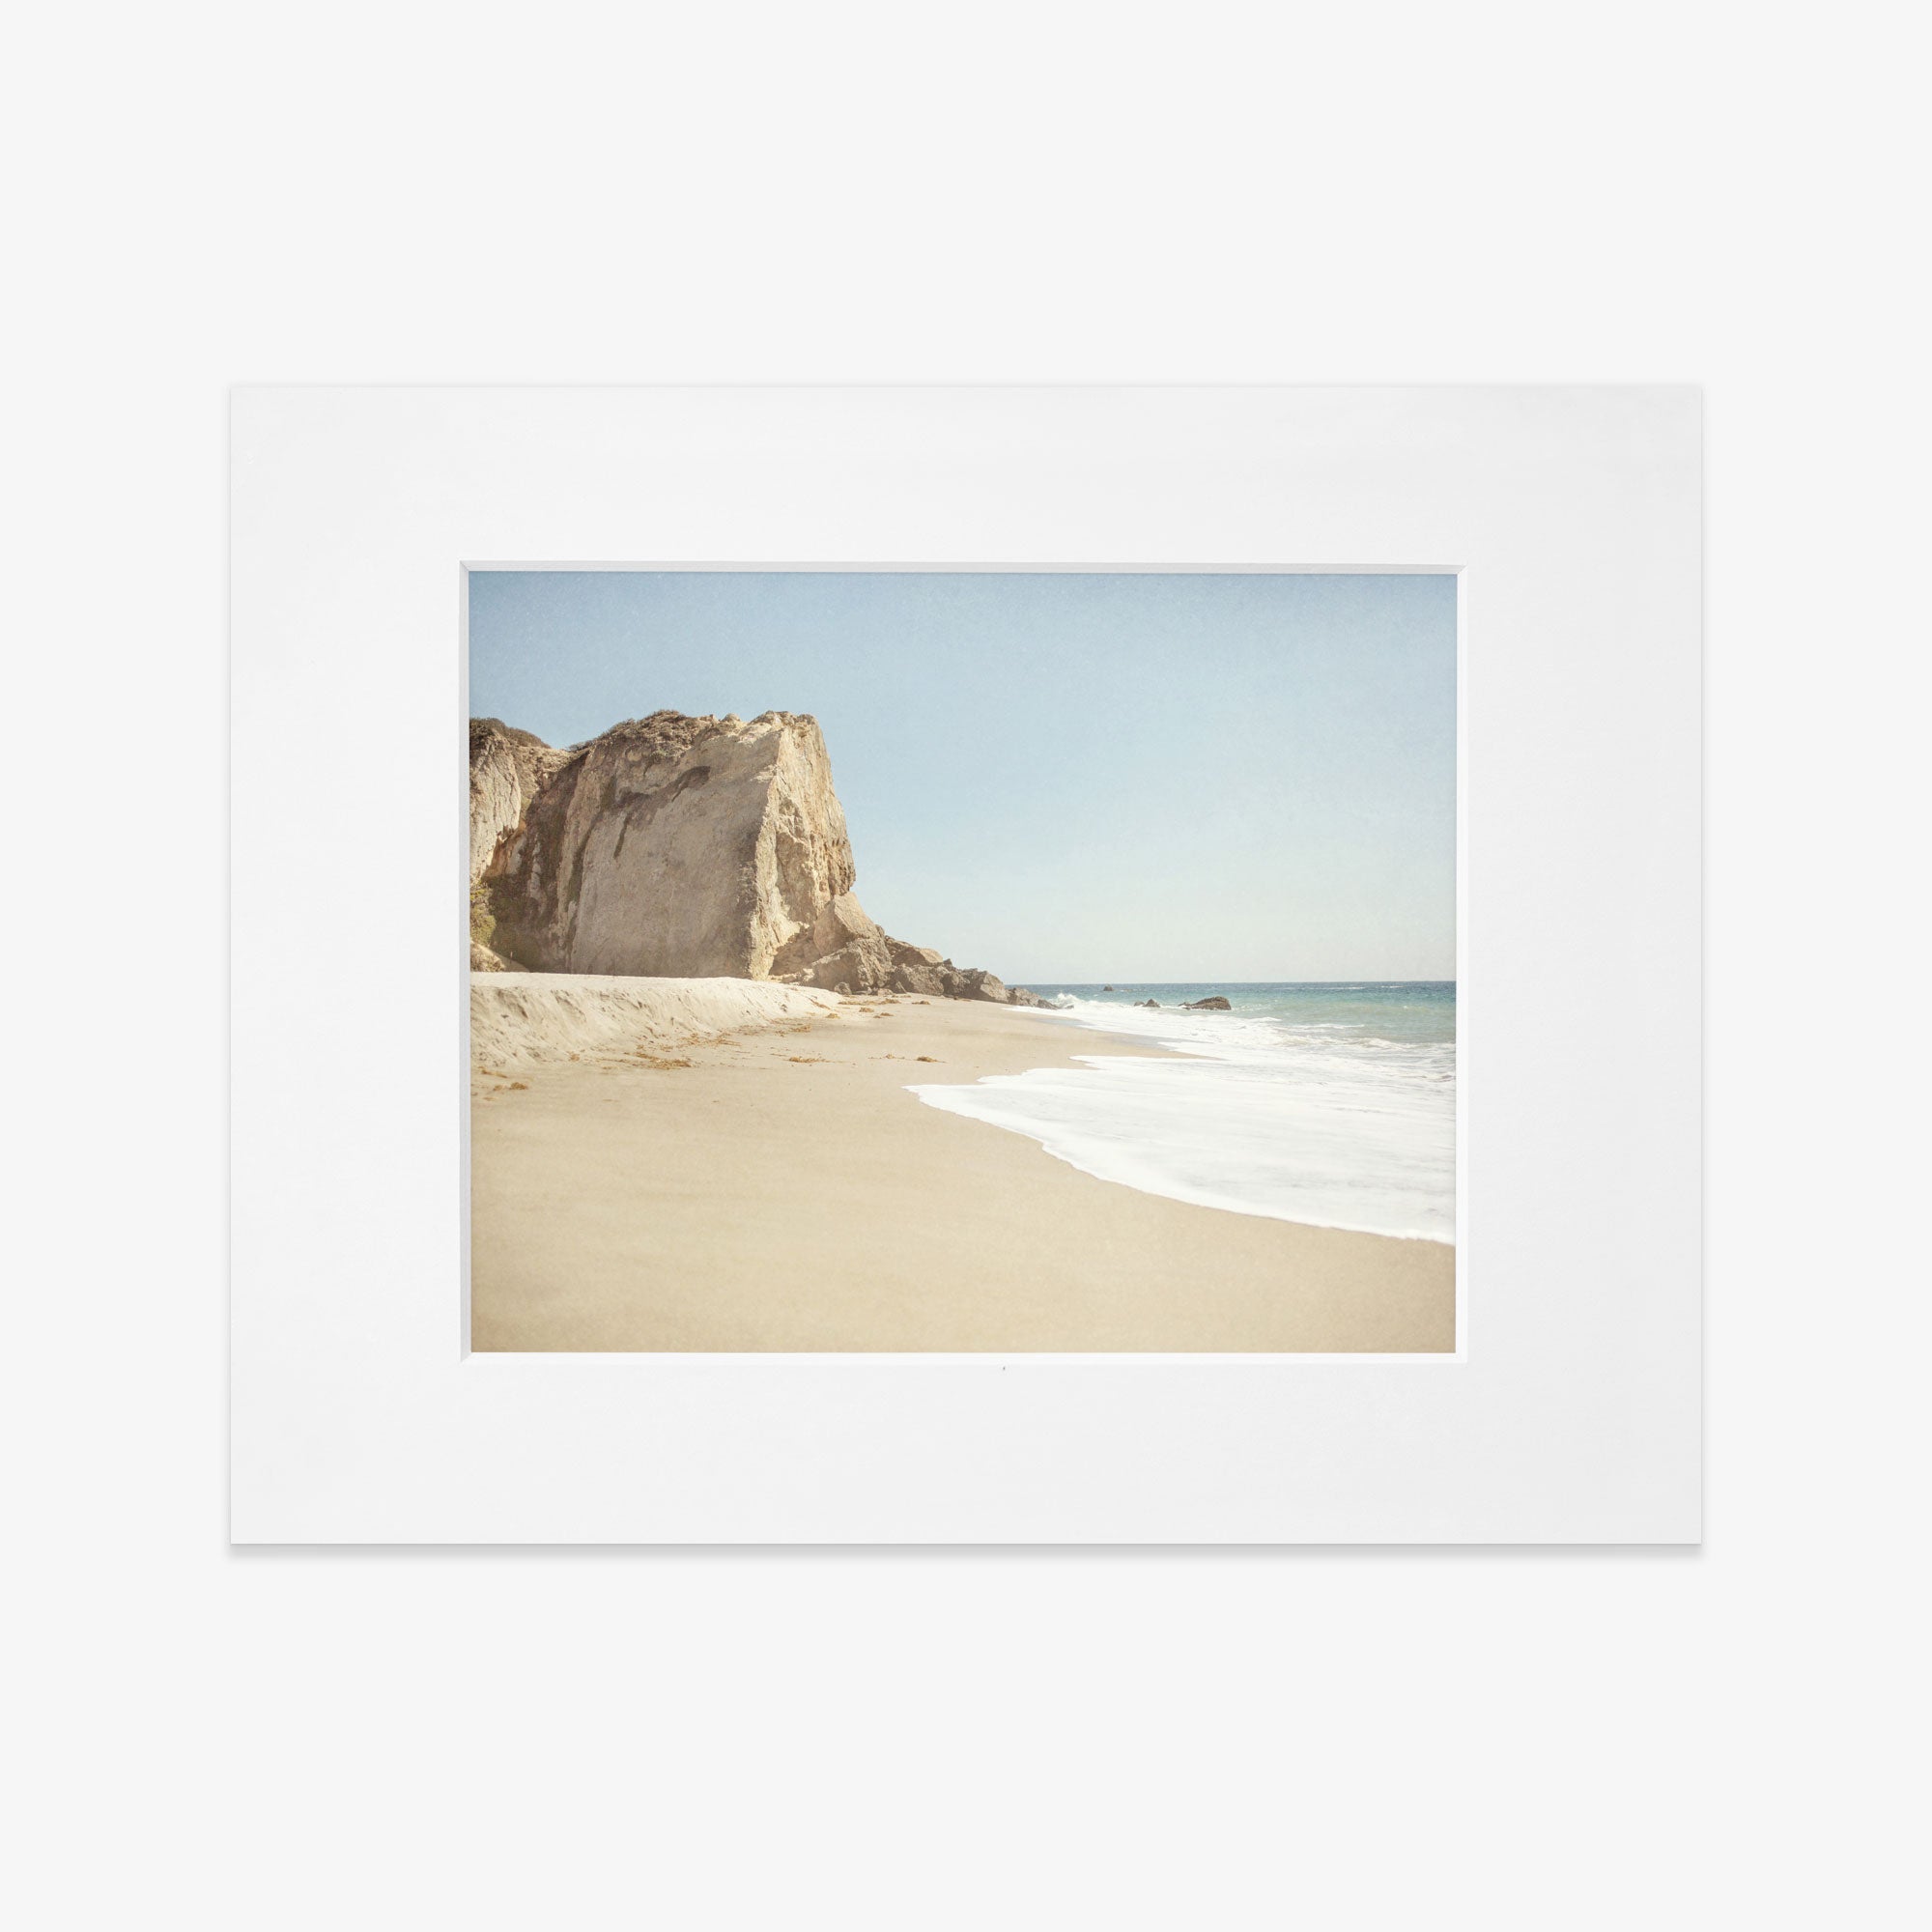 A Offley Green California Malibu Print, &#39;Point Dume&#39; of Point Dume beach with a large rock formation on the left, gentle waves, and a clear sky, placed on a white background.